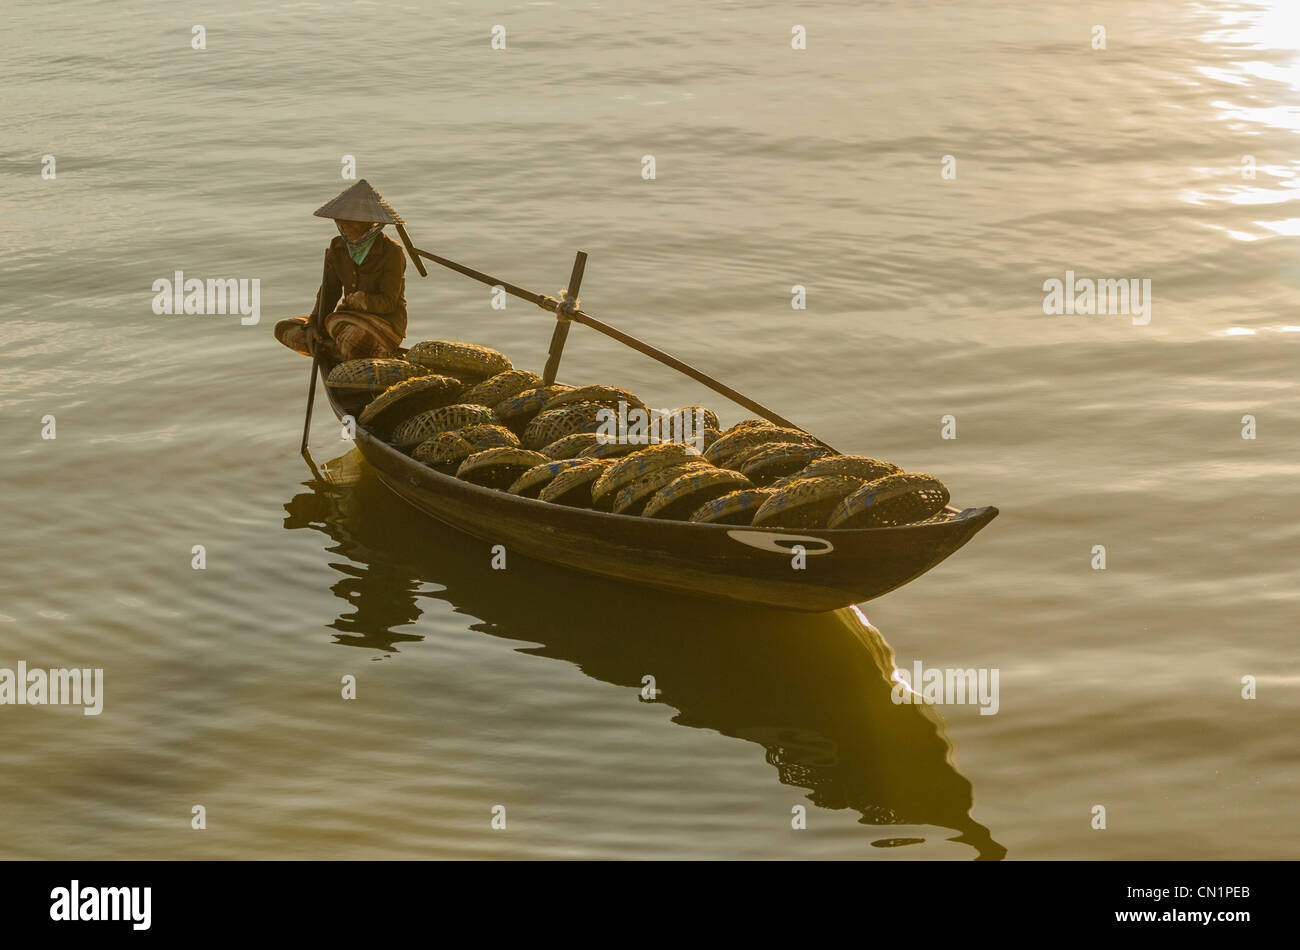 Vietnamese Woman in Conical Hat Rows Boat Filled with Fishing Baskets Stock Photo